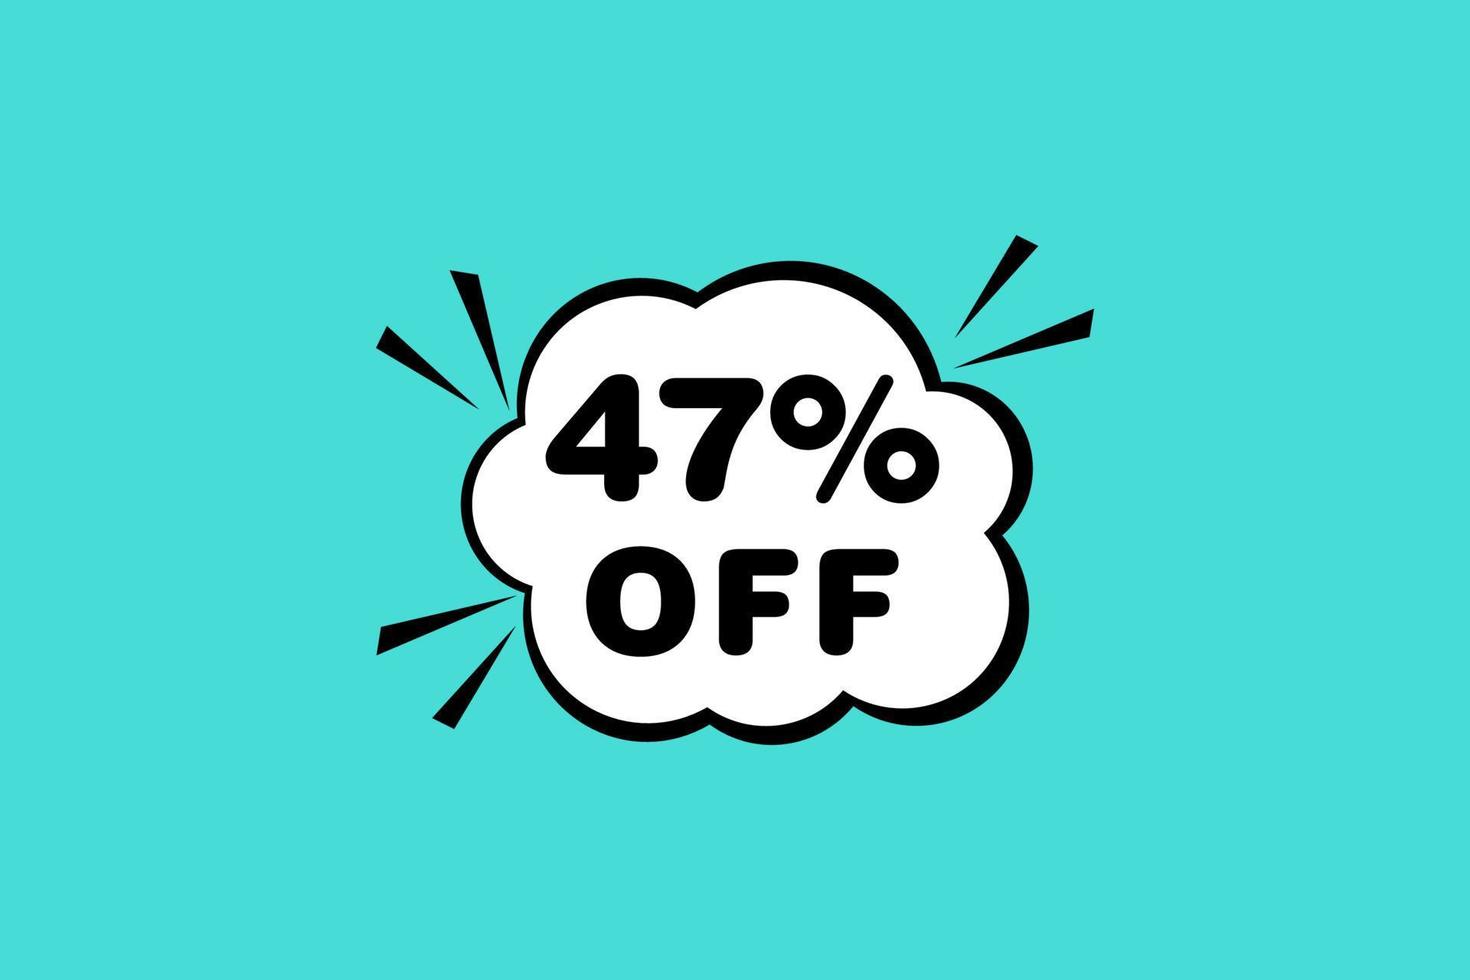 47 percent Sale and discount labels. price off tag icon flat design. vector